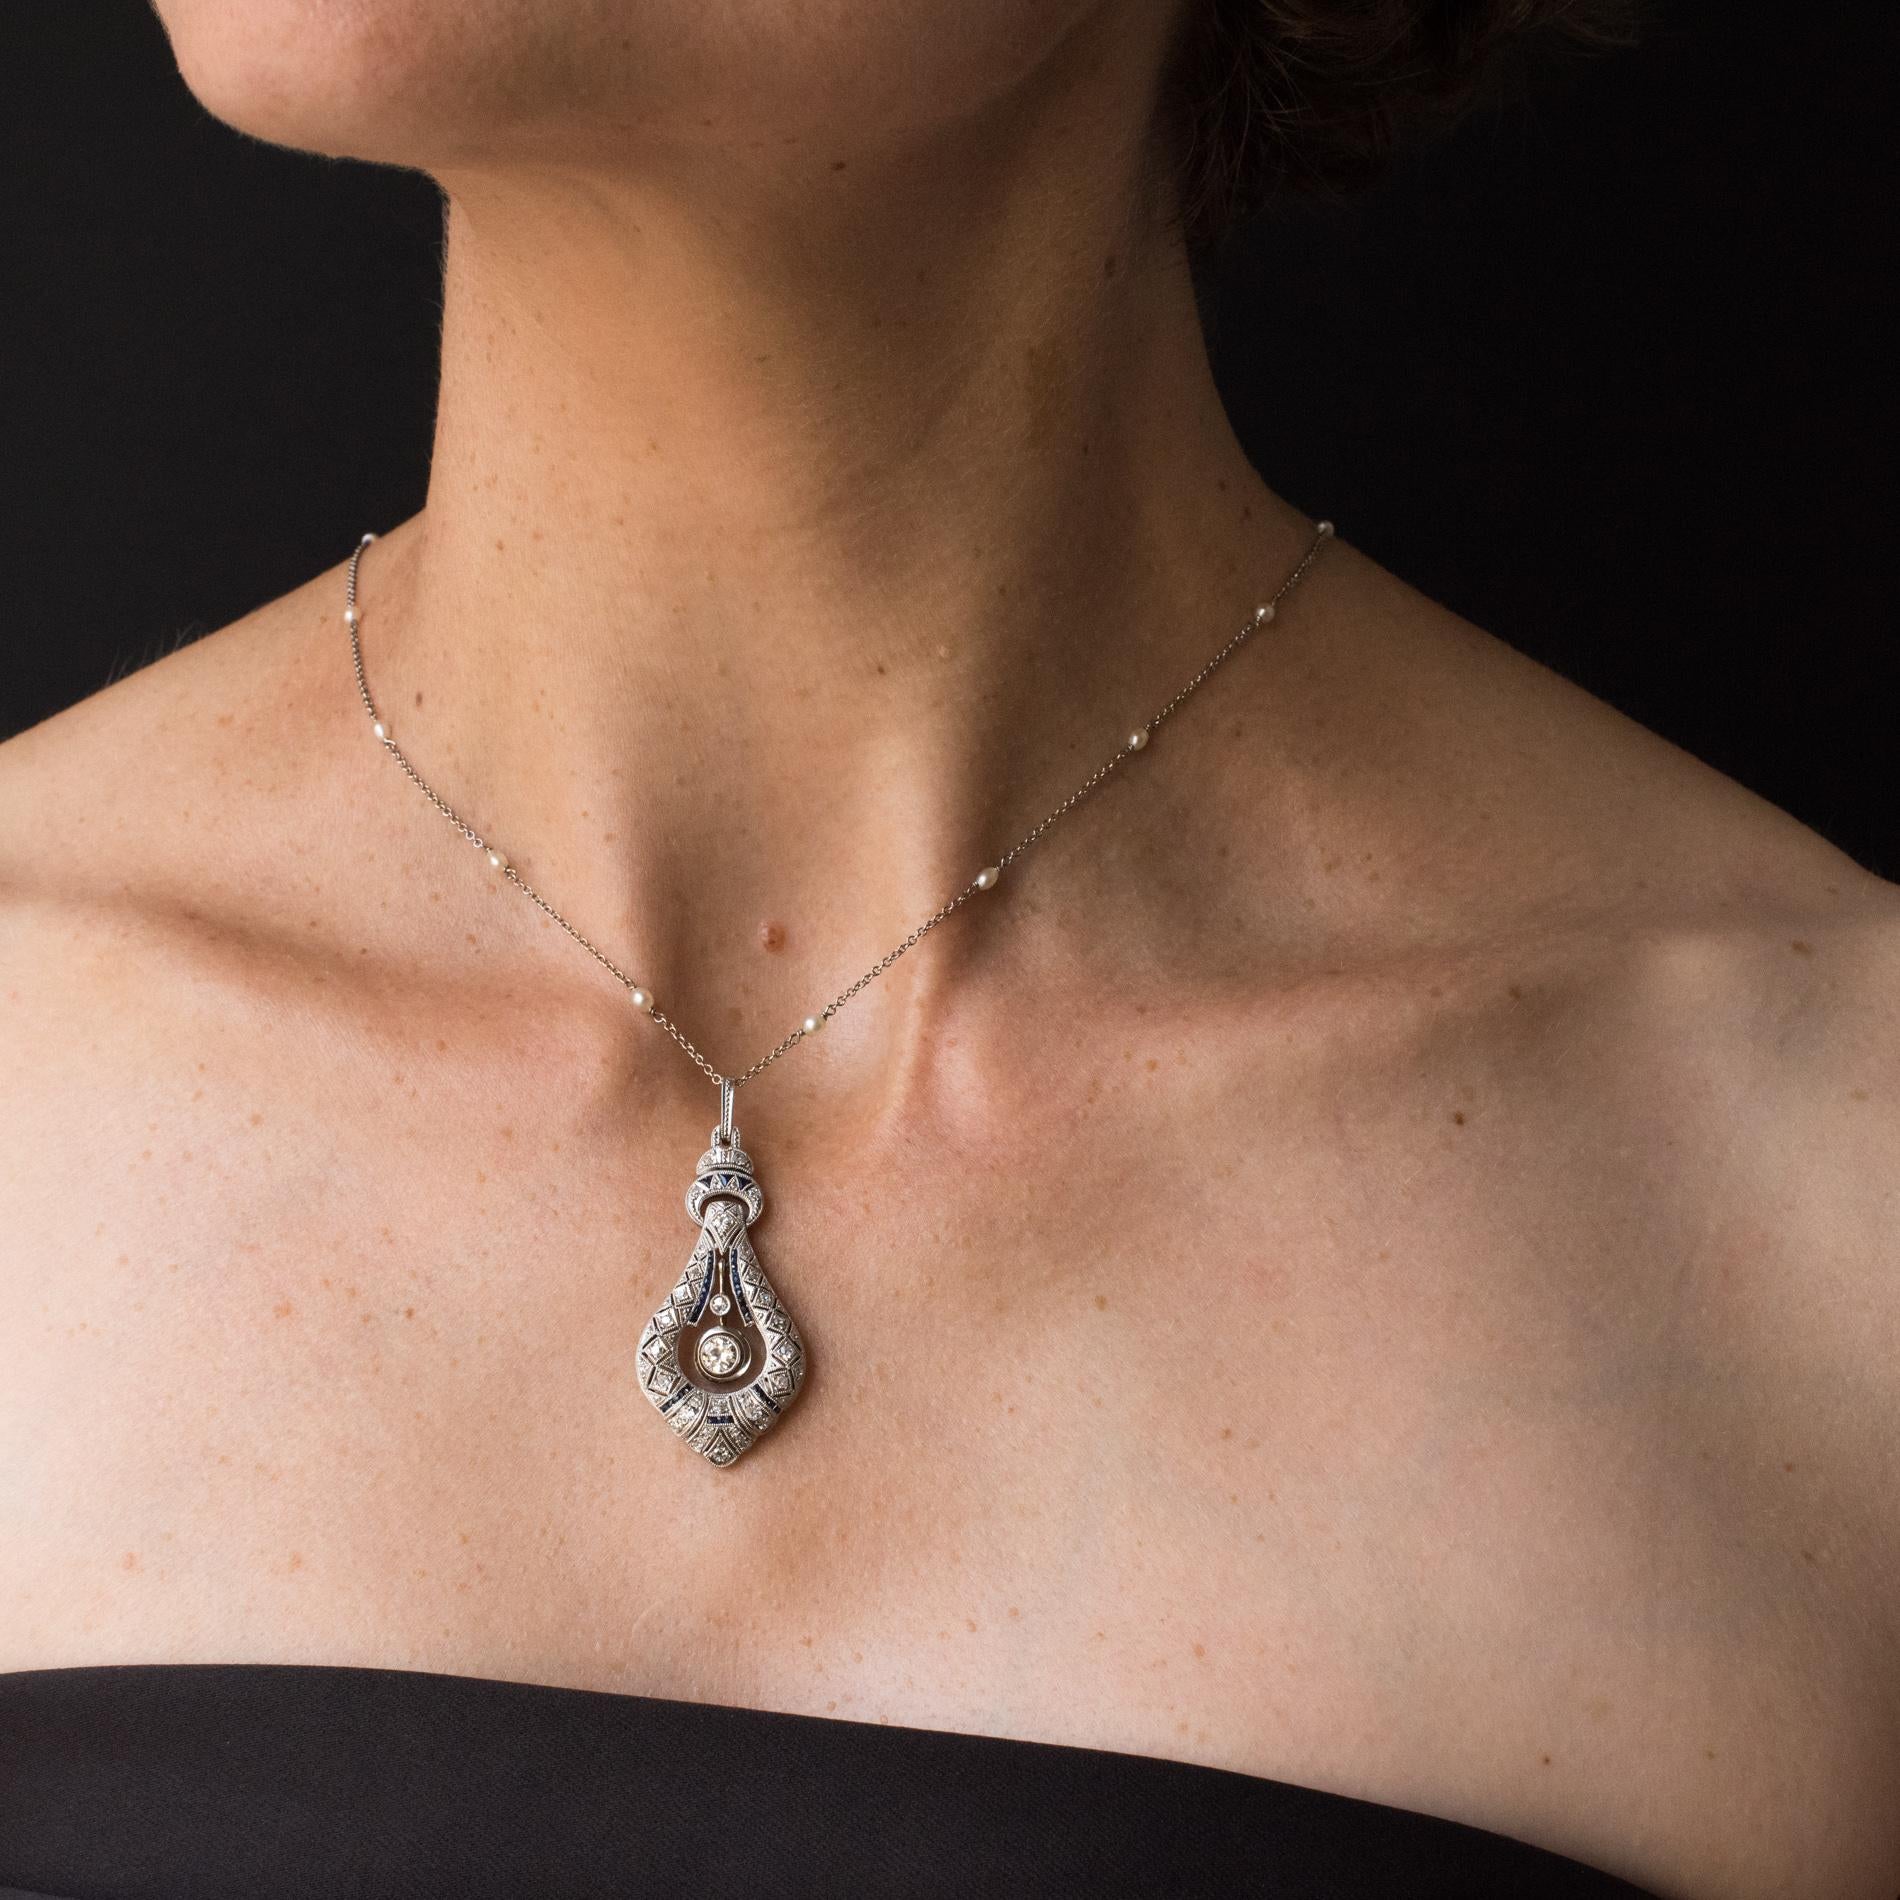 Pendant and chain in platinum, dog's head hallmark.
In the form of an articulated teardrop, this rare Art Deco pendant is decorated with diamonds and calibrated sapphires in a geometric openwork design. At the centre of the teardrop dangle 2